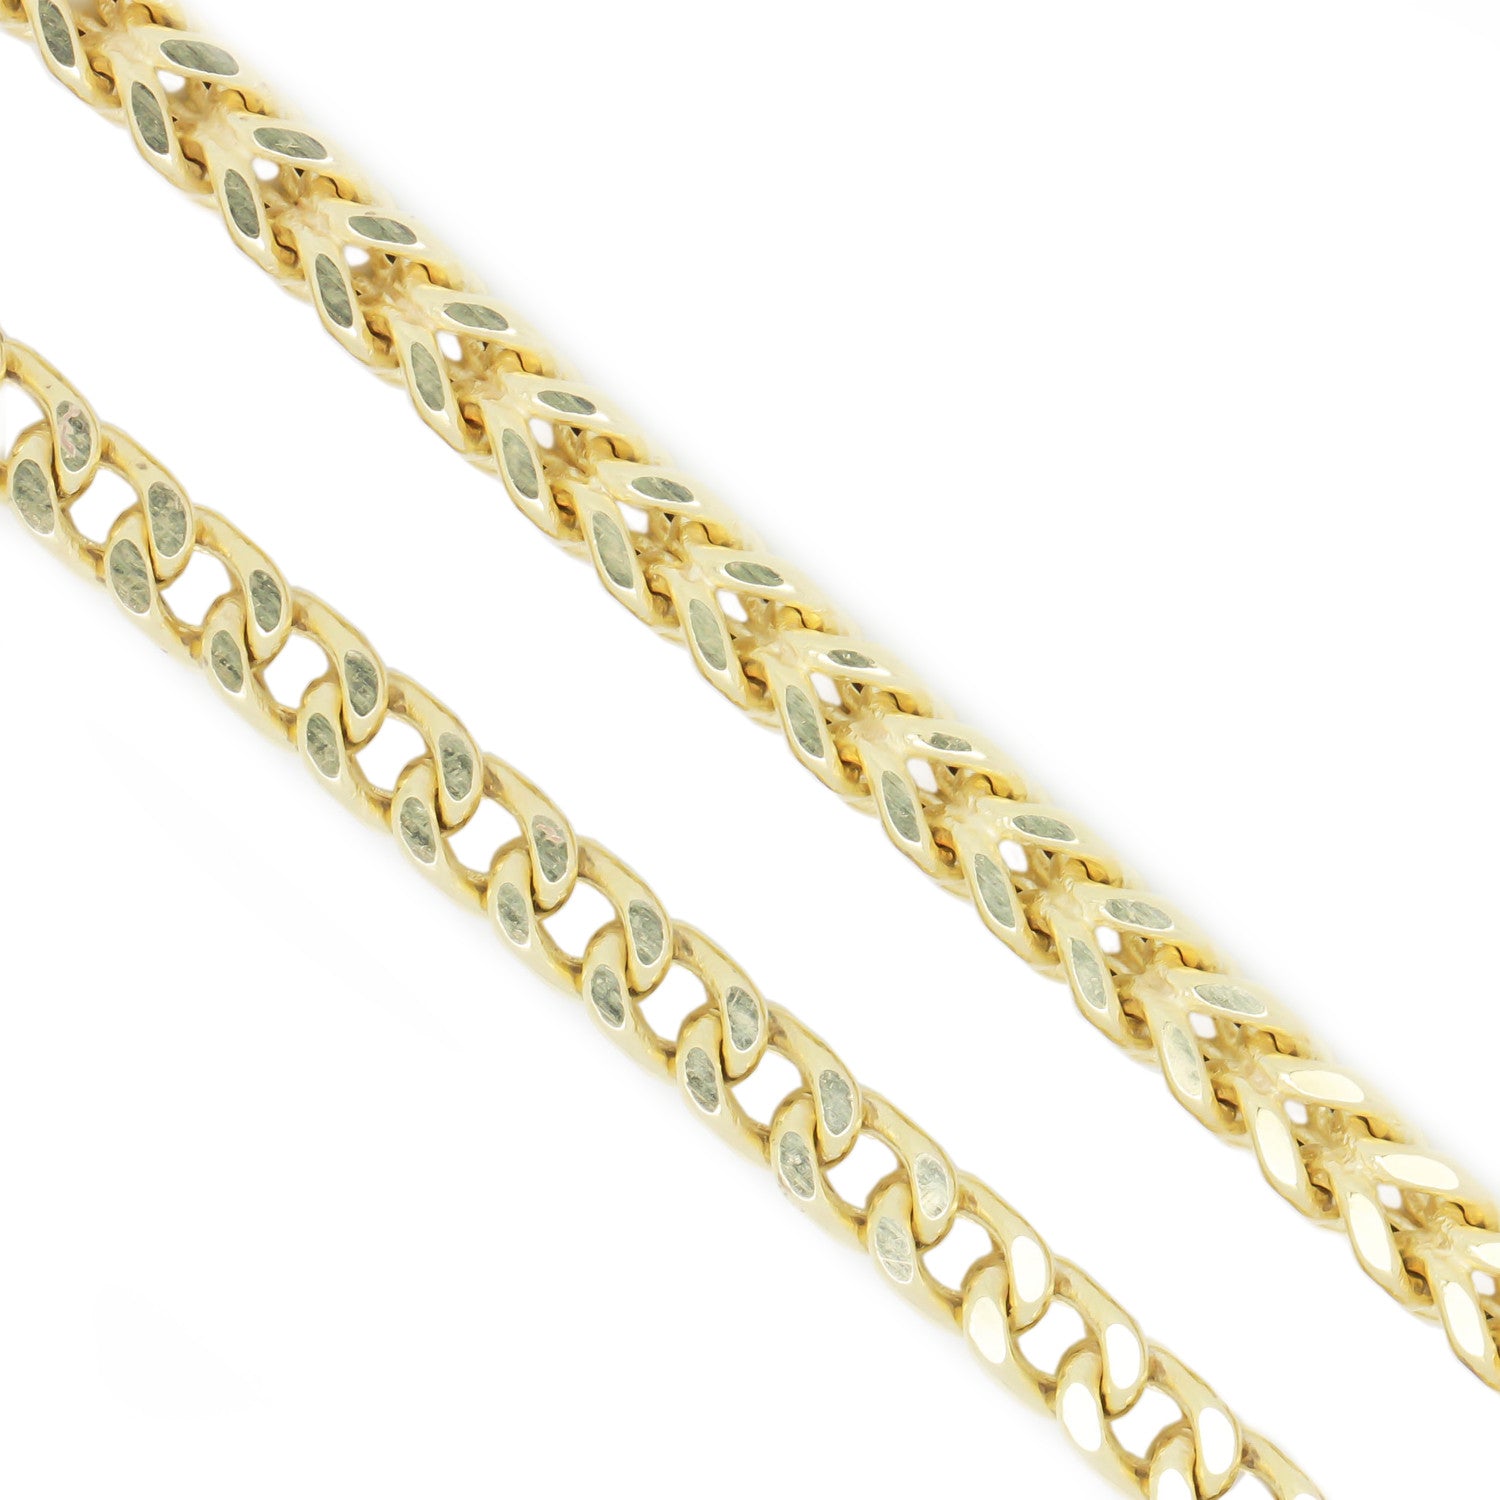 10K Yellow Gold 3.0 mm Franco Chain Necklace 26 Inches Diamond Cut